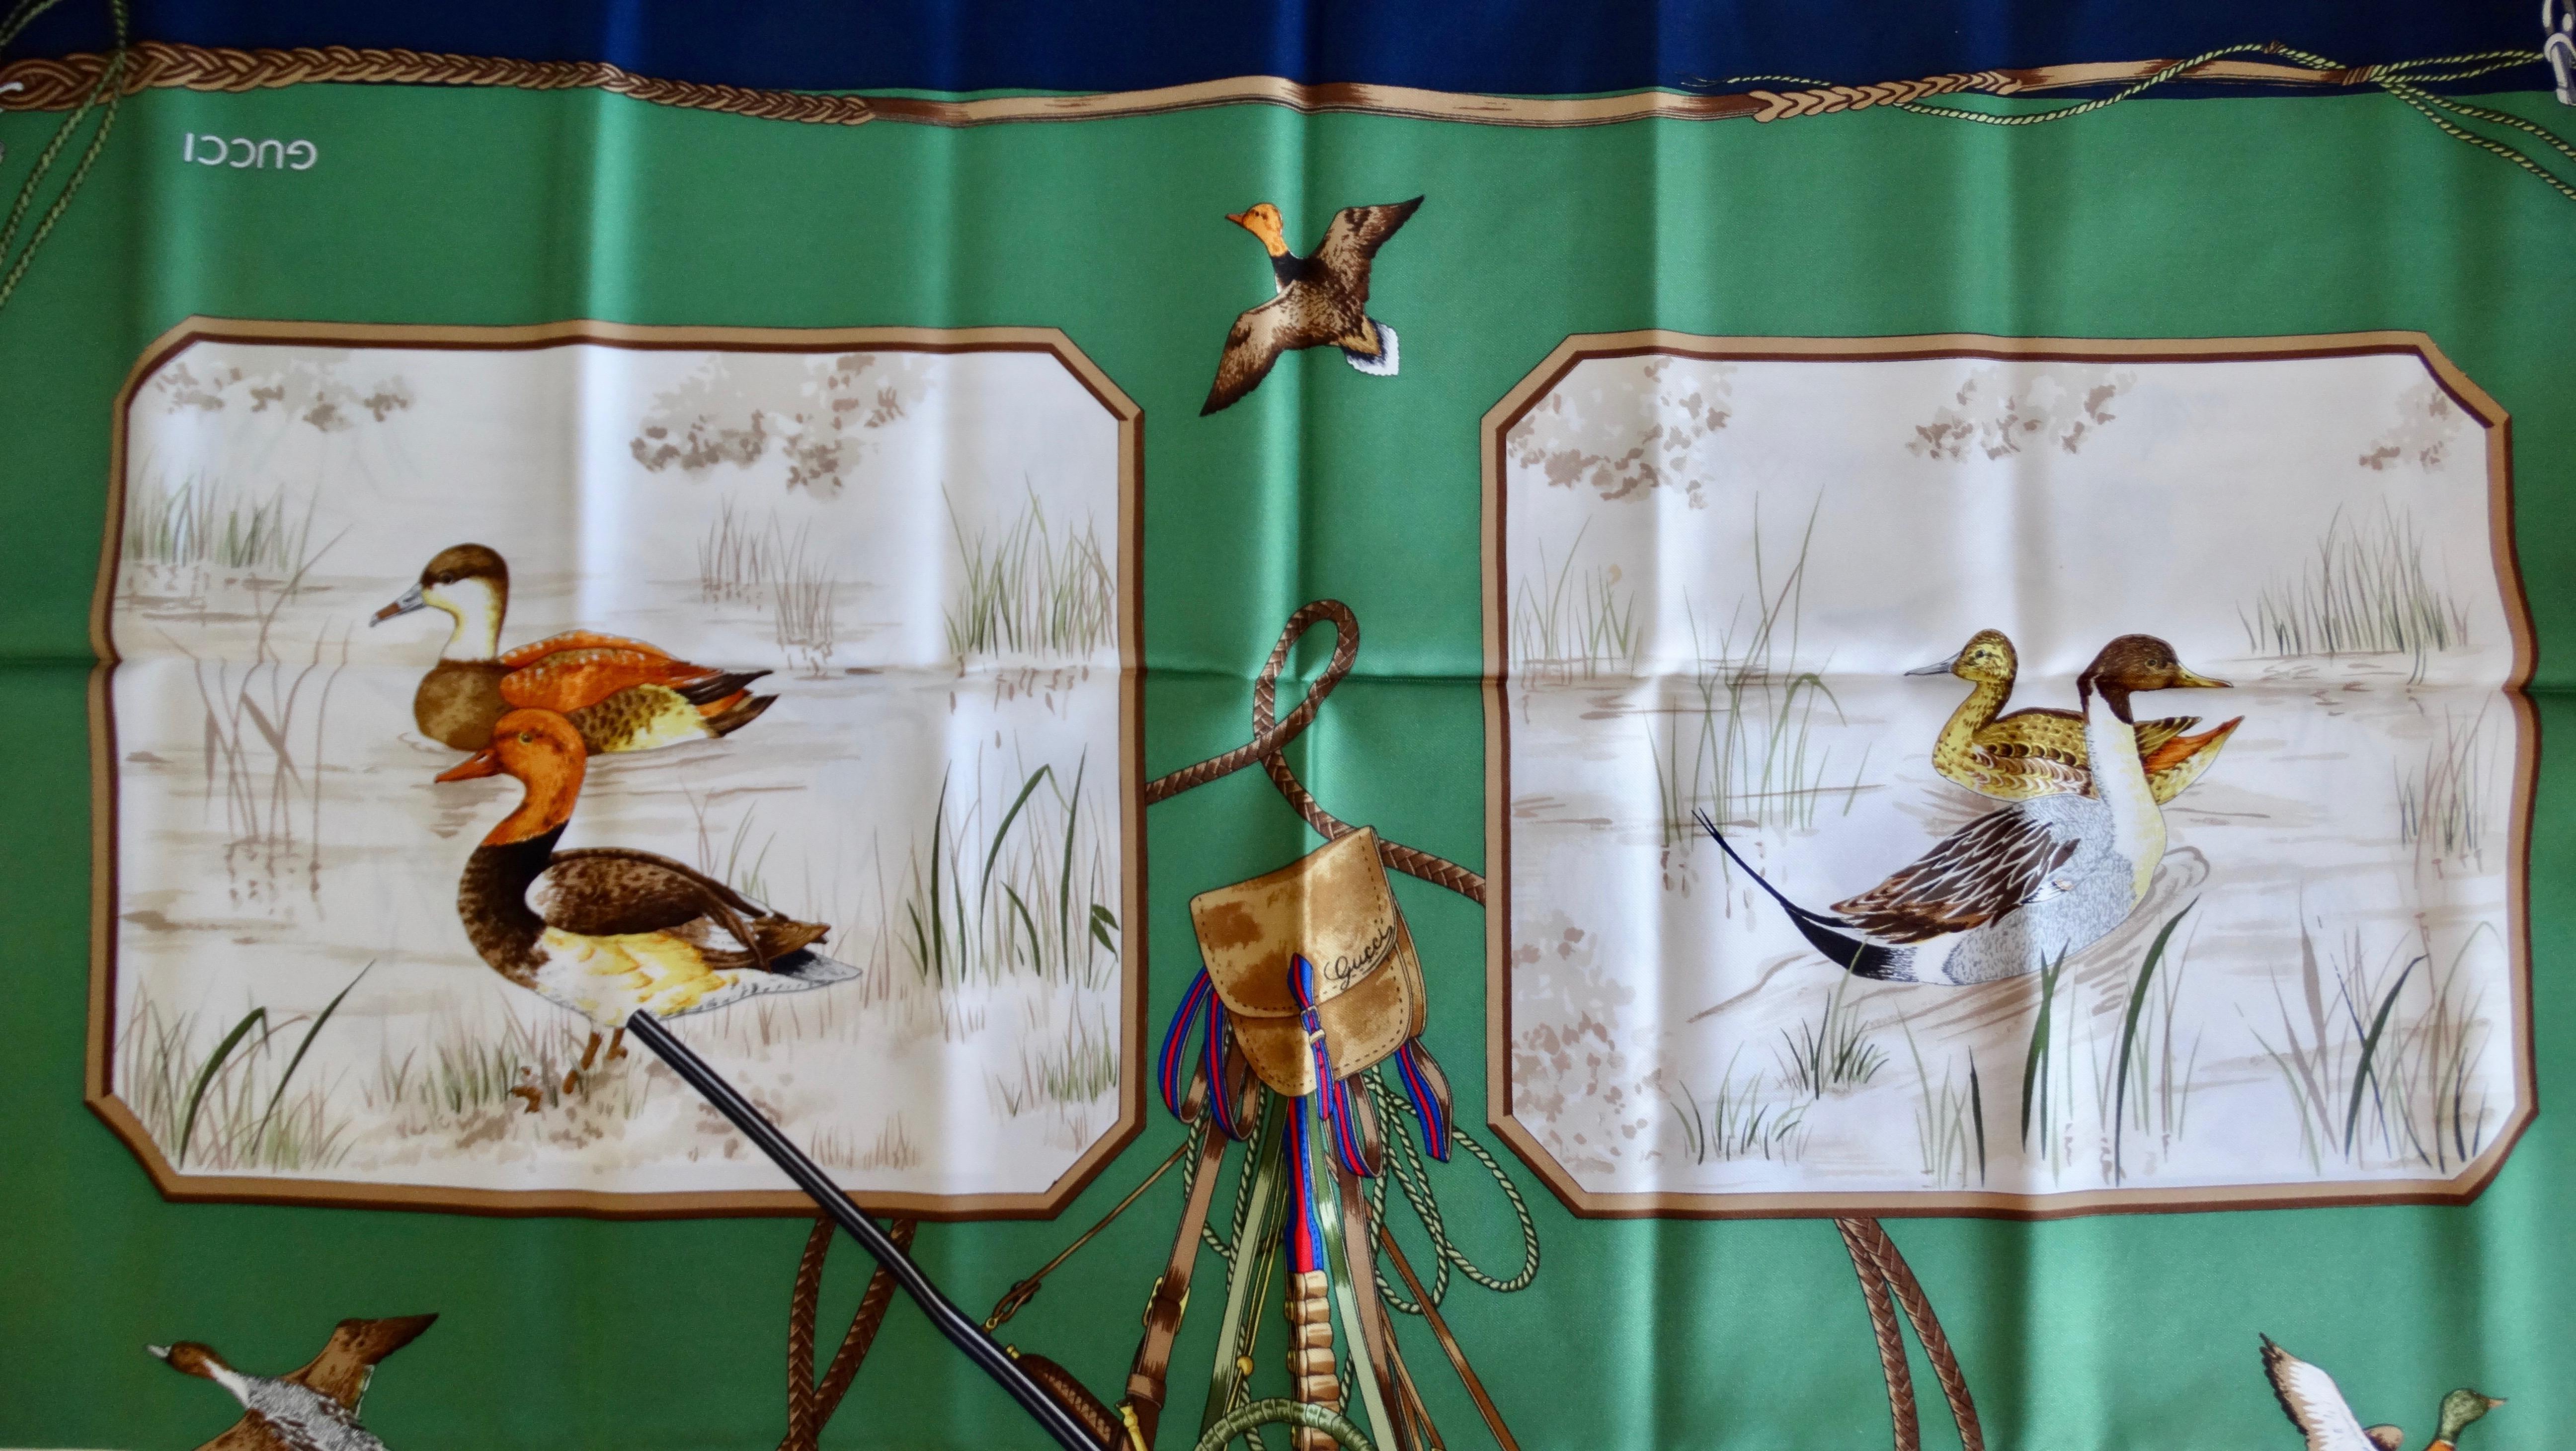 Everyone need a Gucci scarf in their wardrobe! Circa 1980s, this gorgeous Gucci silk scarf features a duck hunting motif. Motif includes 4 duck scenes, a hunting bag and scattered flying ducks. A green backdrop contrasts against the rich natural